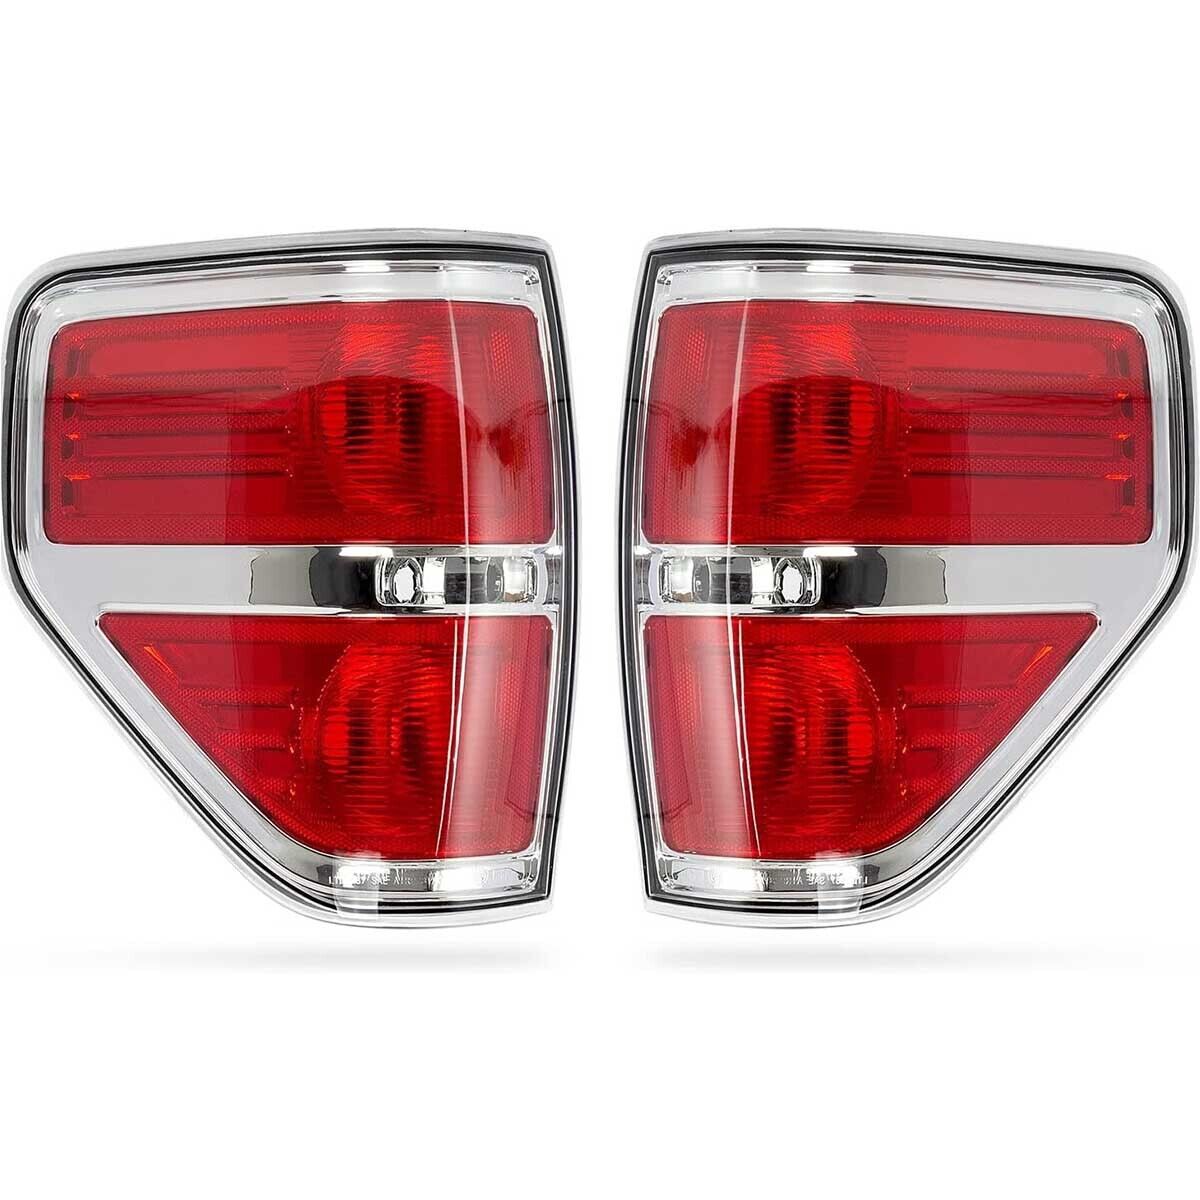 For 09-14 Ford F-150 F150 Styleside Truck Tail Lights Chrome Clear Brake Lamps